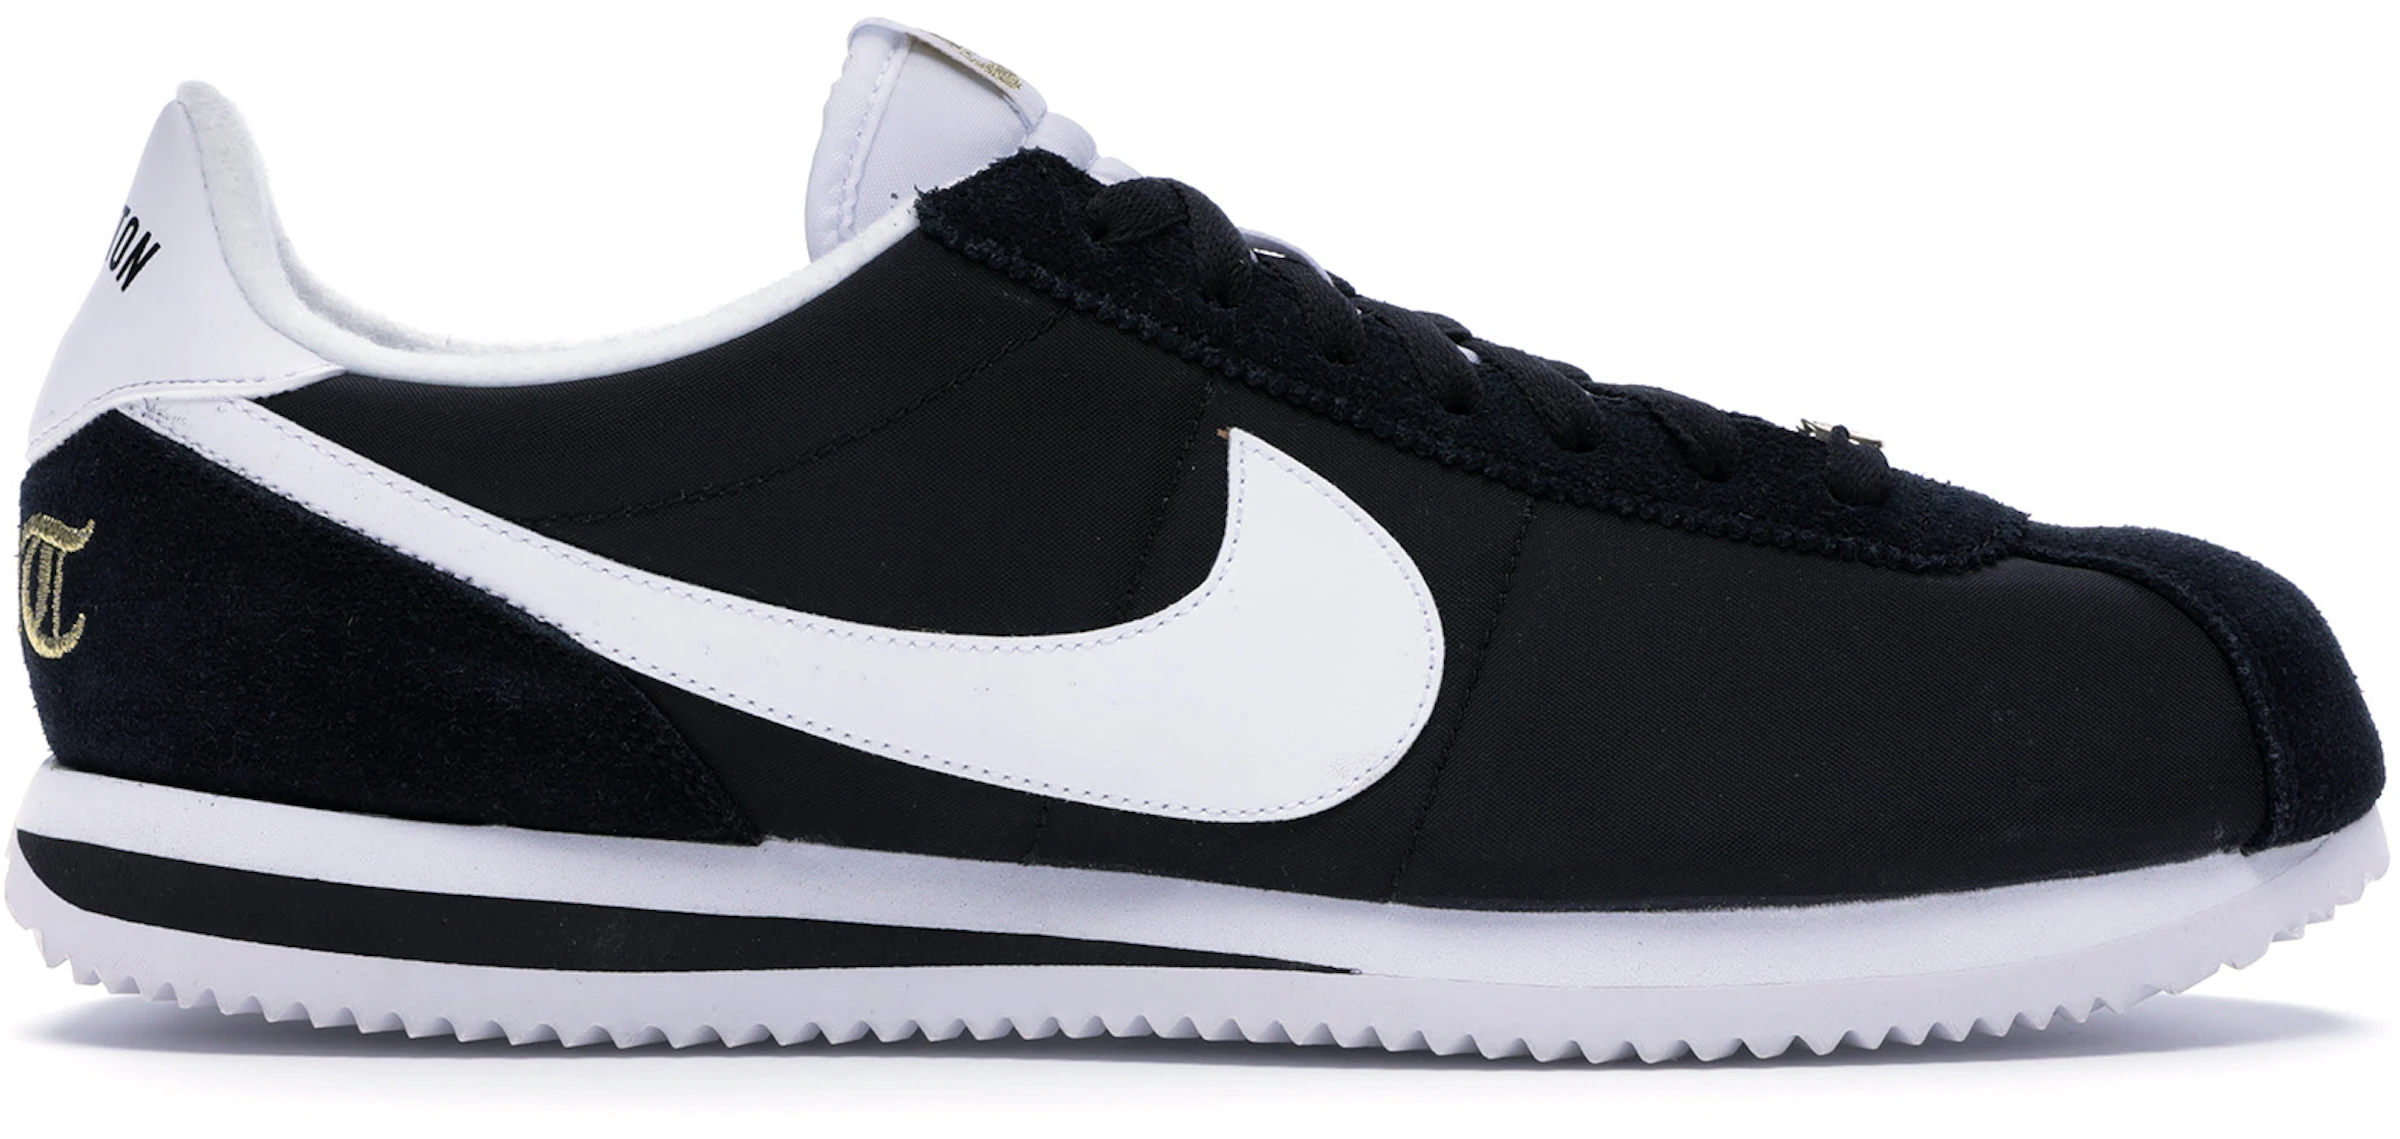 Buy Nike Cortez for Men and StockX